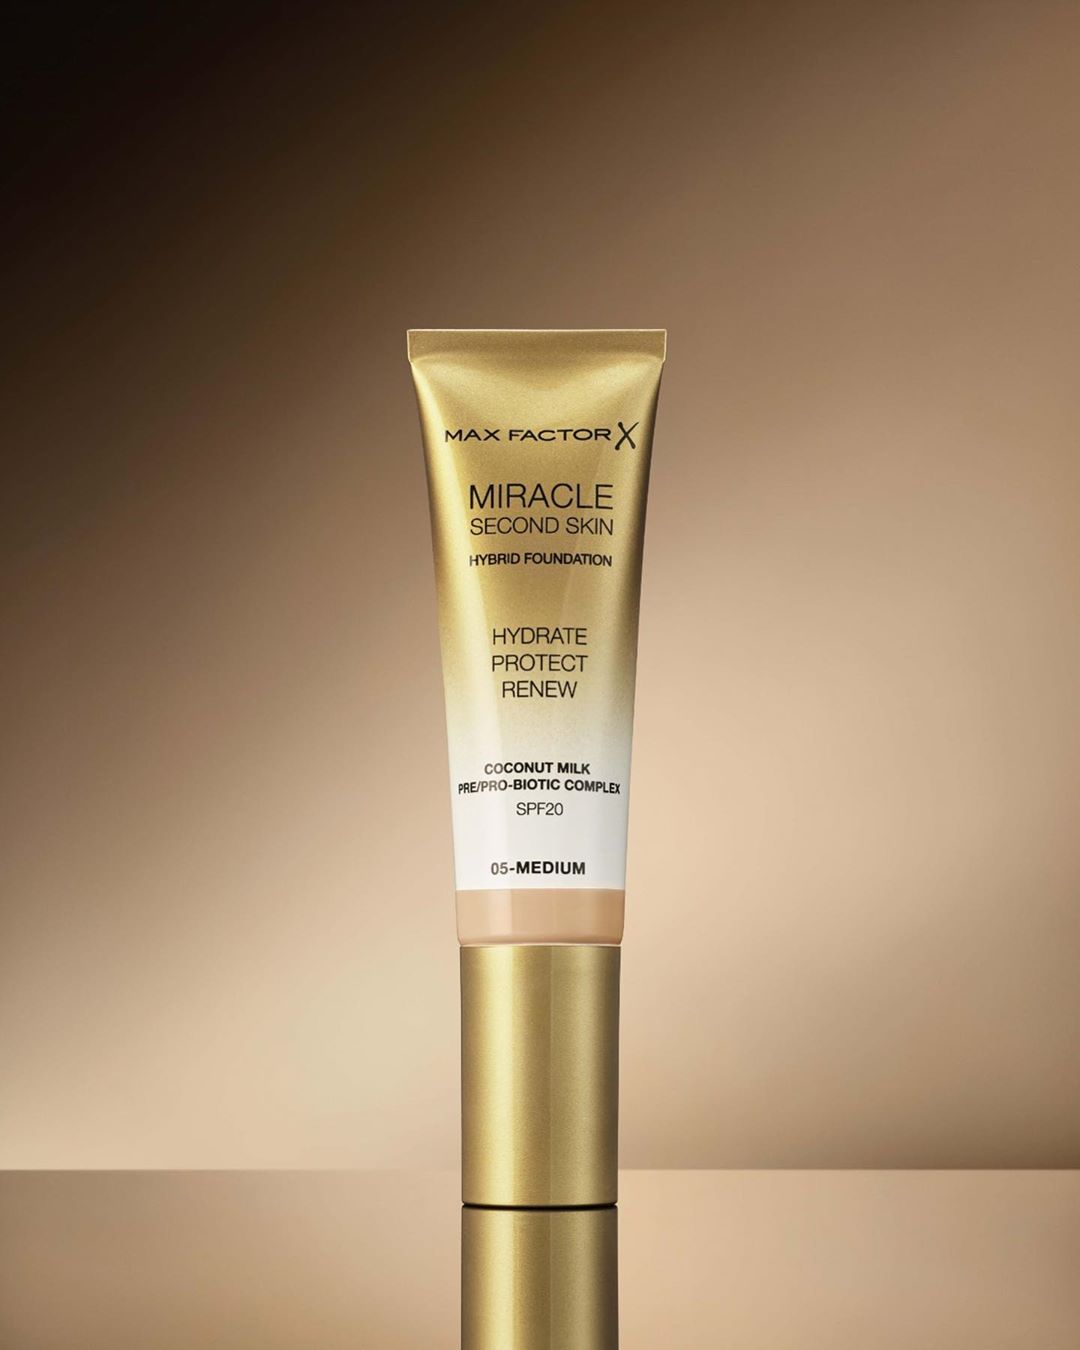 Max Factor - NEW Miracle Second Skin Foundation. This lightweight foundation contains SPF20 for added protection ☀️ and is infused with coconut milk for long lasting hydration 💧

#MiracleSecondSkin
#M...